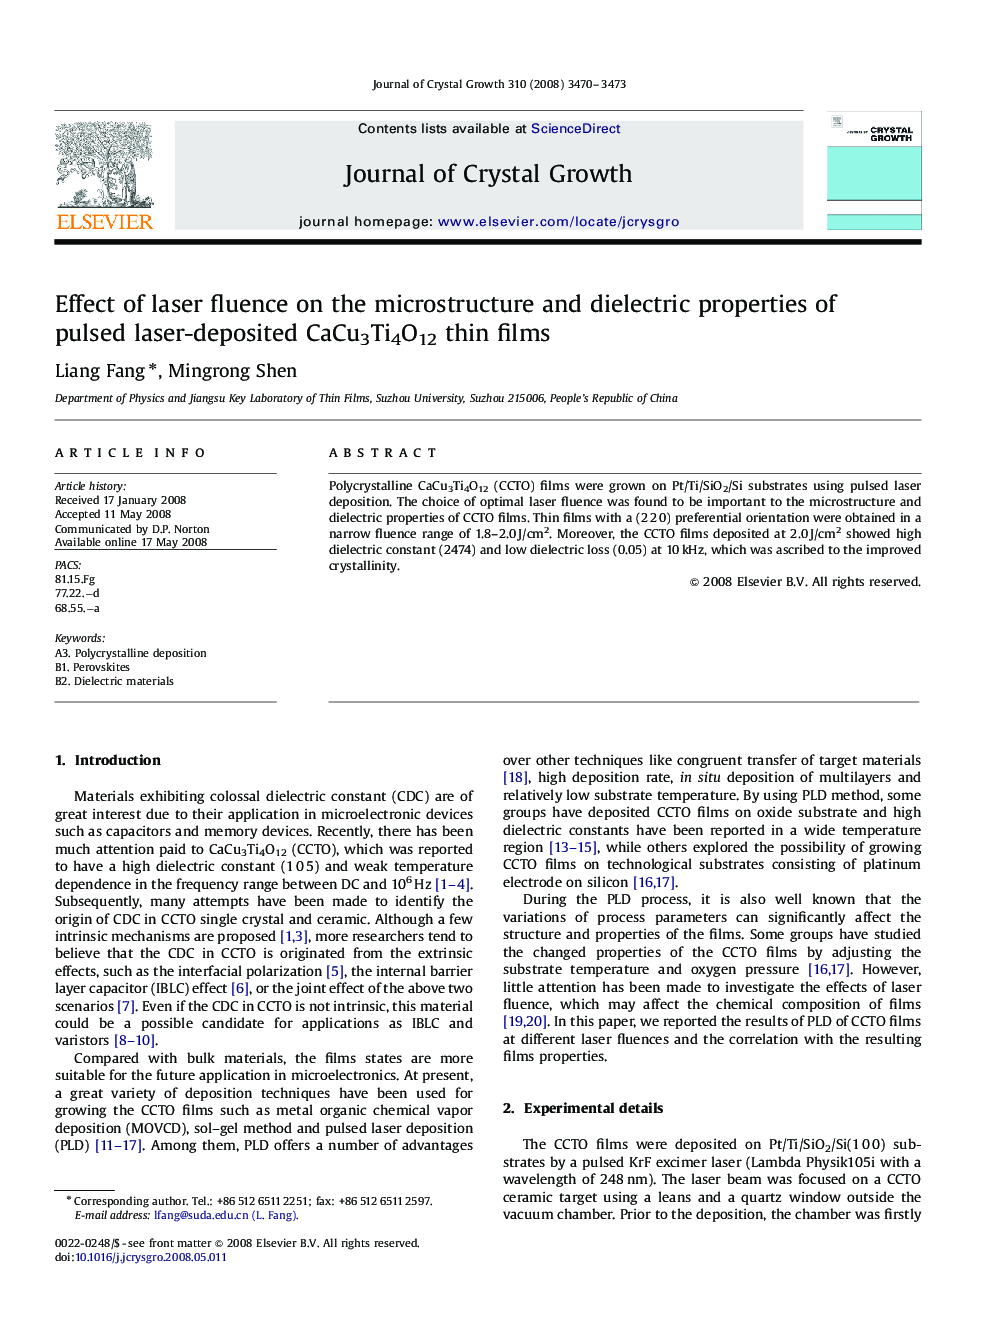 Effect of laser fluence on the microstructure and dielectric properties of pulsed laser-deposited CaCu3Ti4O12 thin films